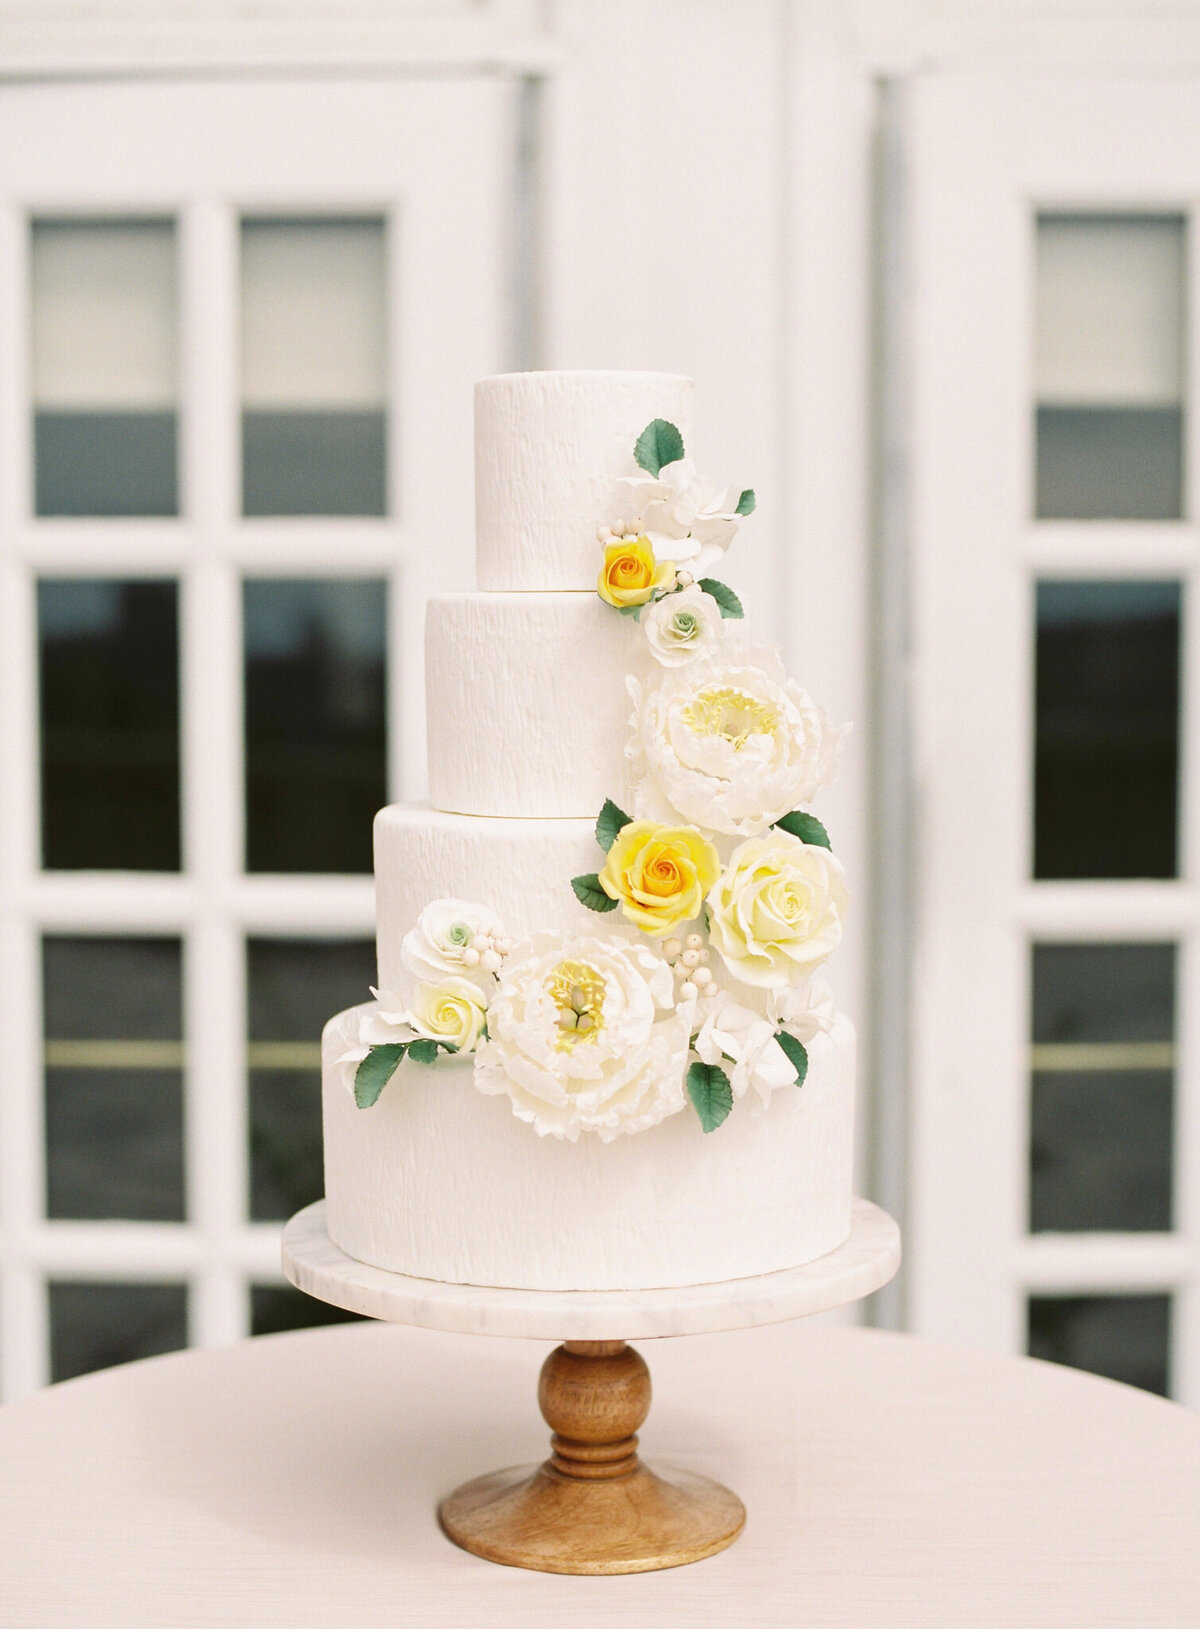 Beautiful professional four-tiered textured white wedding cake, with white and yellow cascading sugar roses, created by Brianne Gabrielle Cakes,  elegant cakes & desserts in Edmonton, AB, featured on the Brontë Bride Vendor Guide.